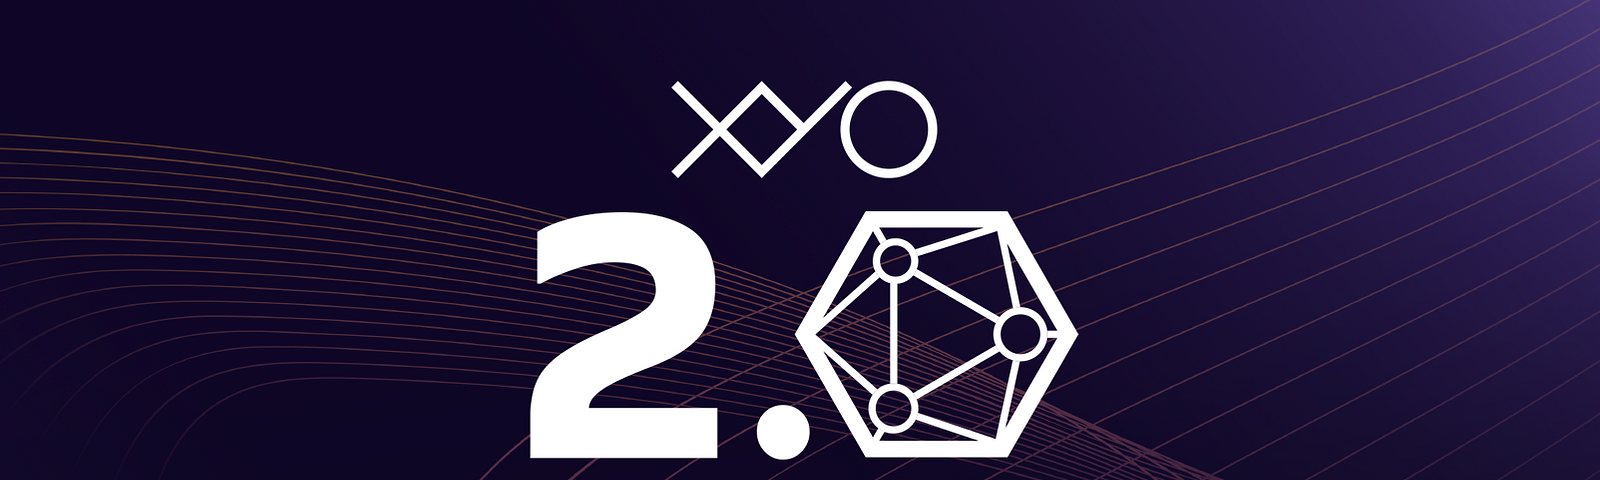 XYO 2.0 IS NOW LIVE